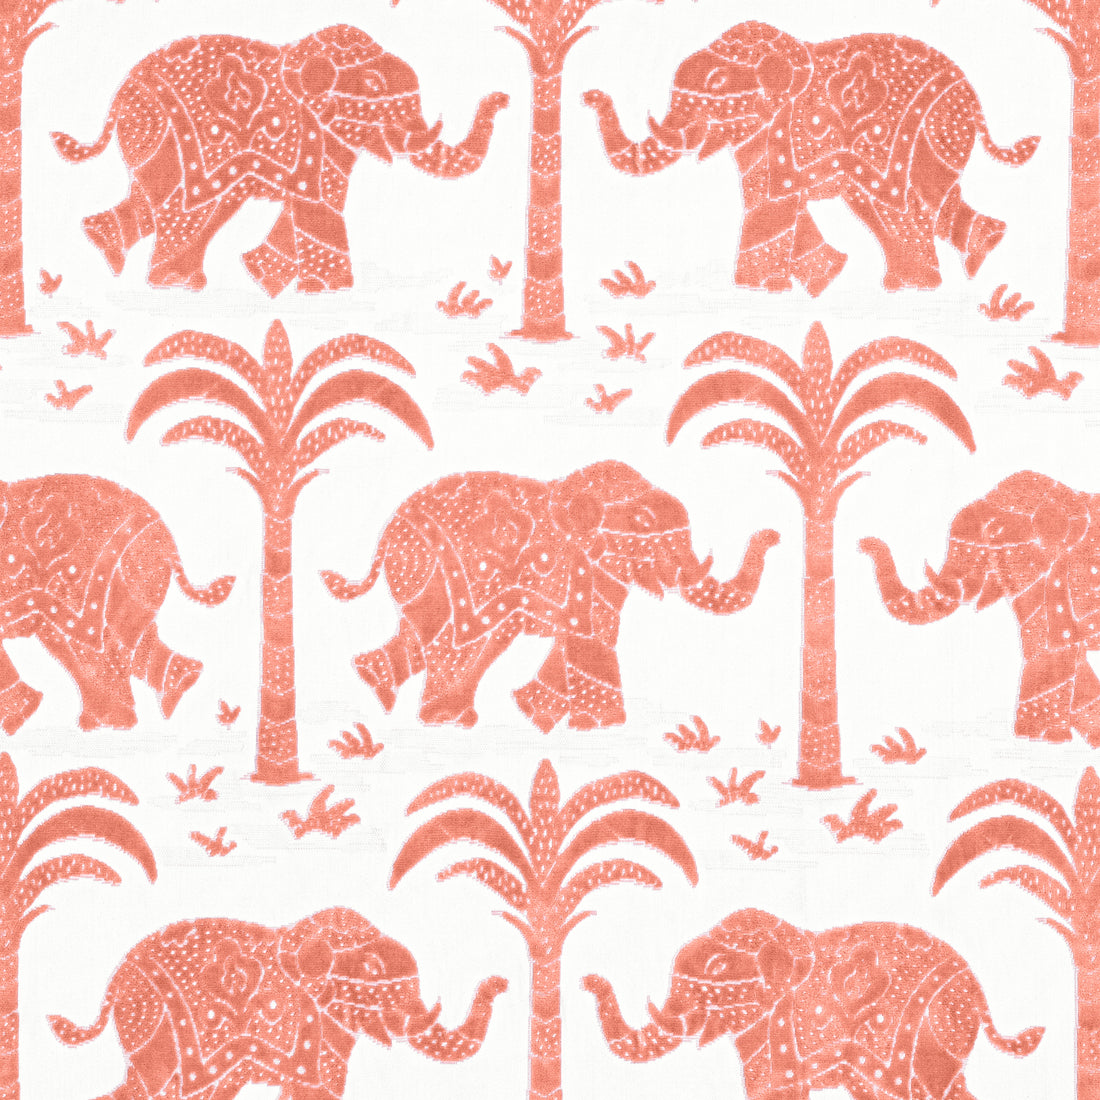 Elephant Velvet fabric in coral color - pattern number W716203 - by Thibaut in the Kismet collection